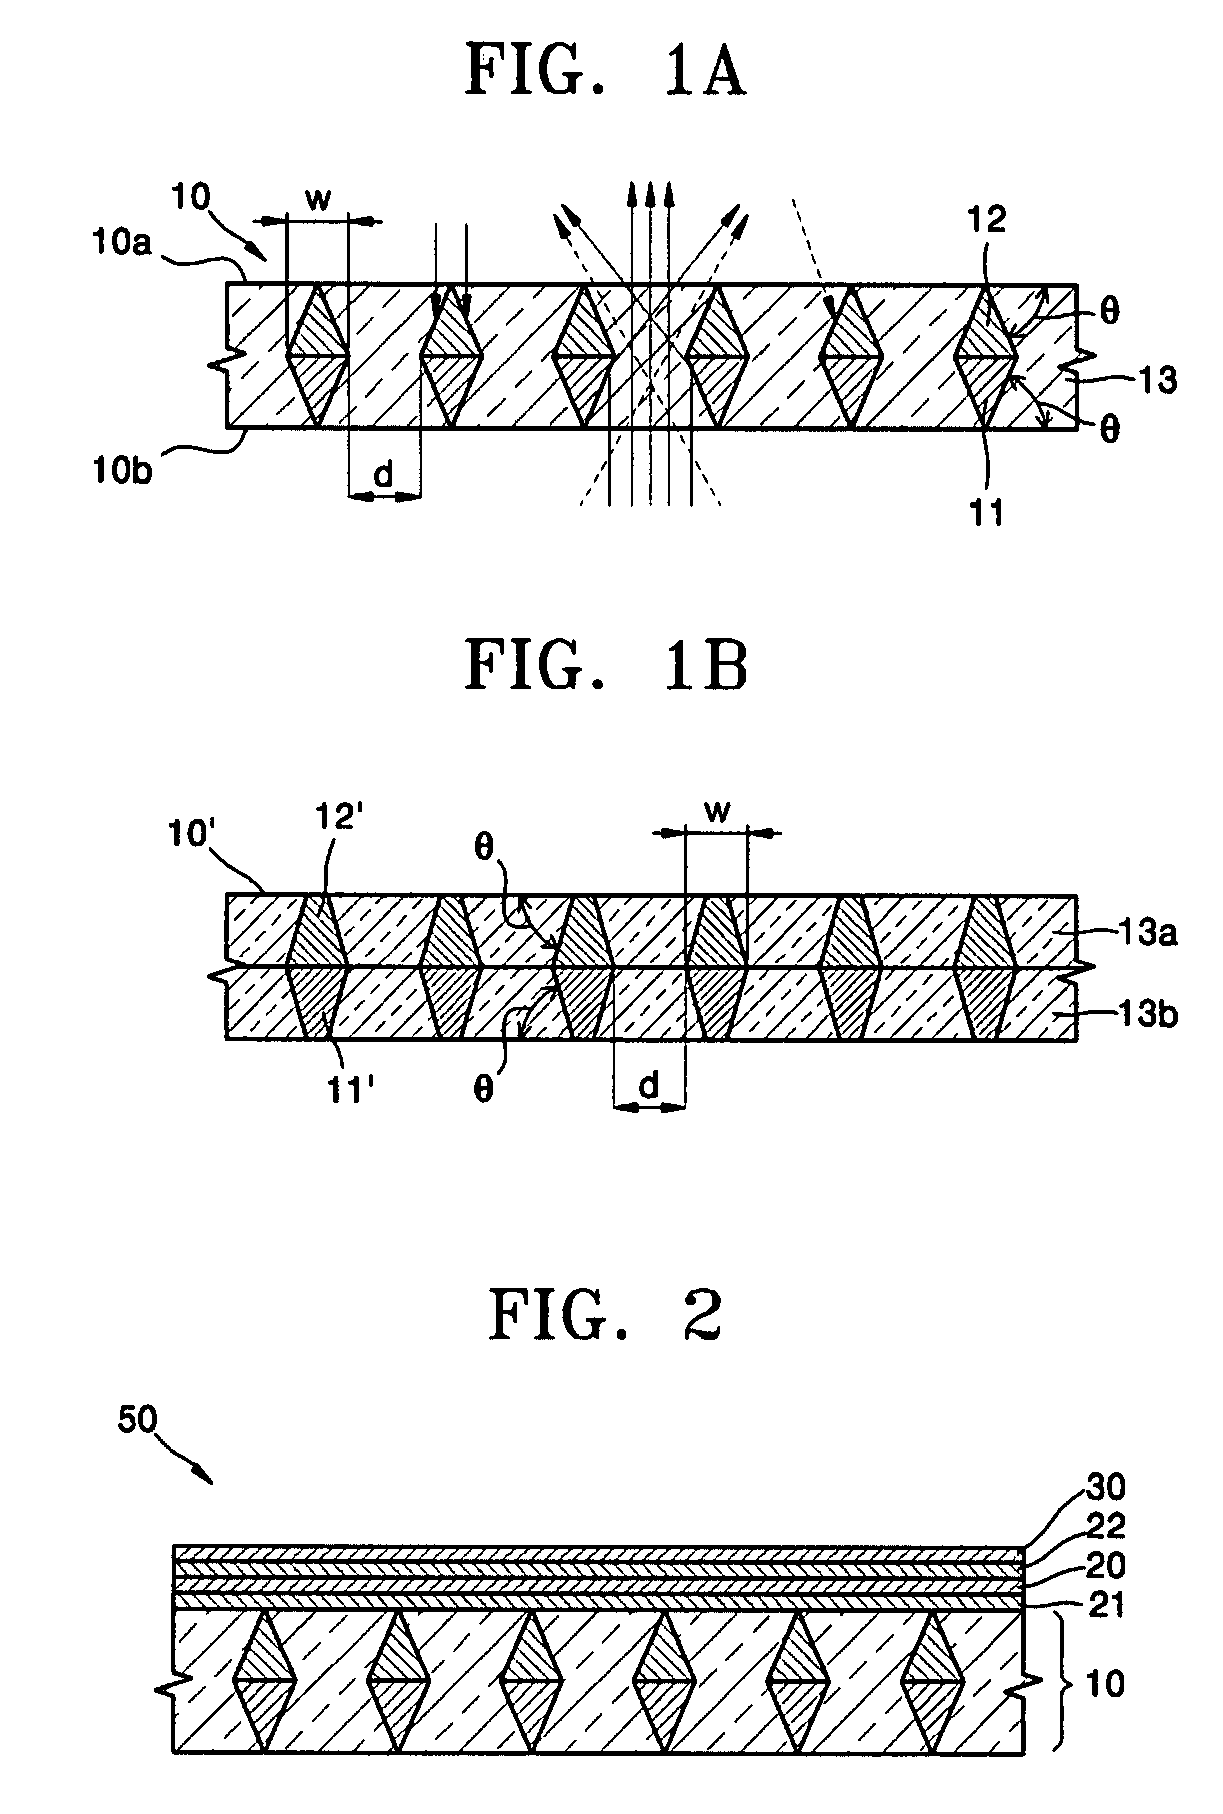 Filter and display apparatus having the same